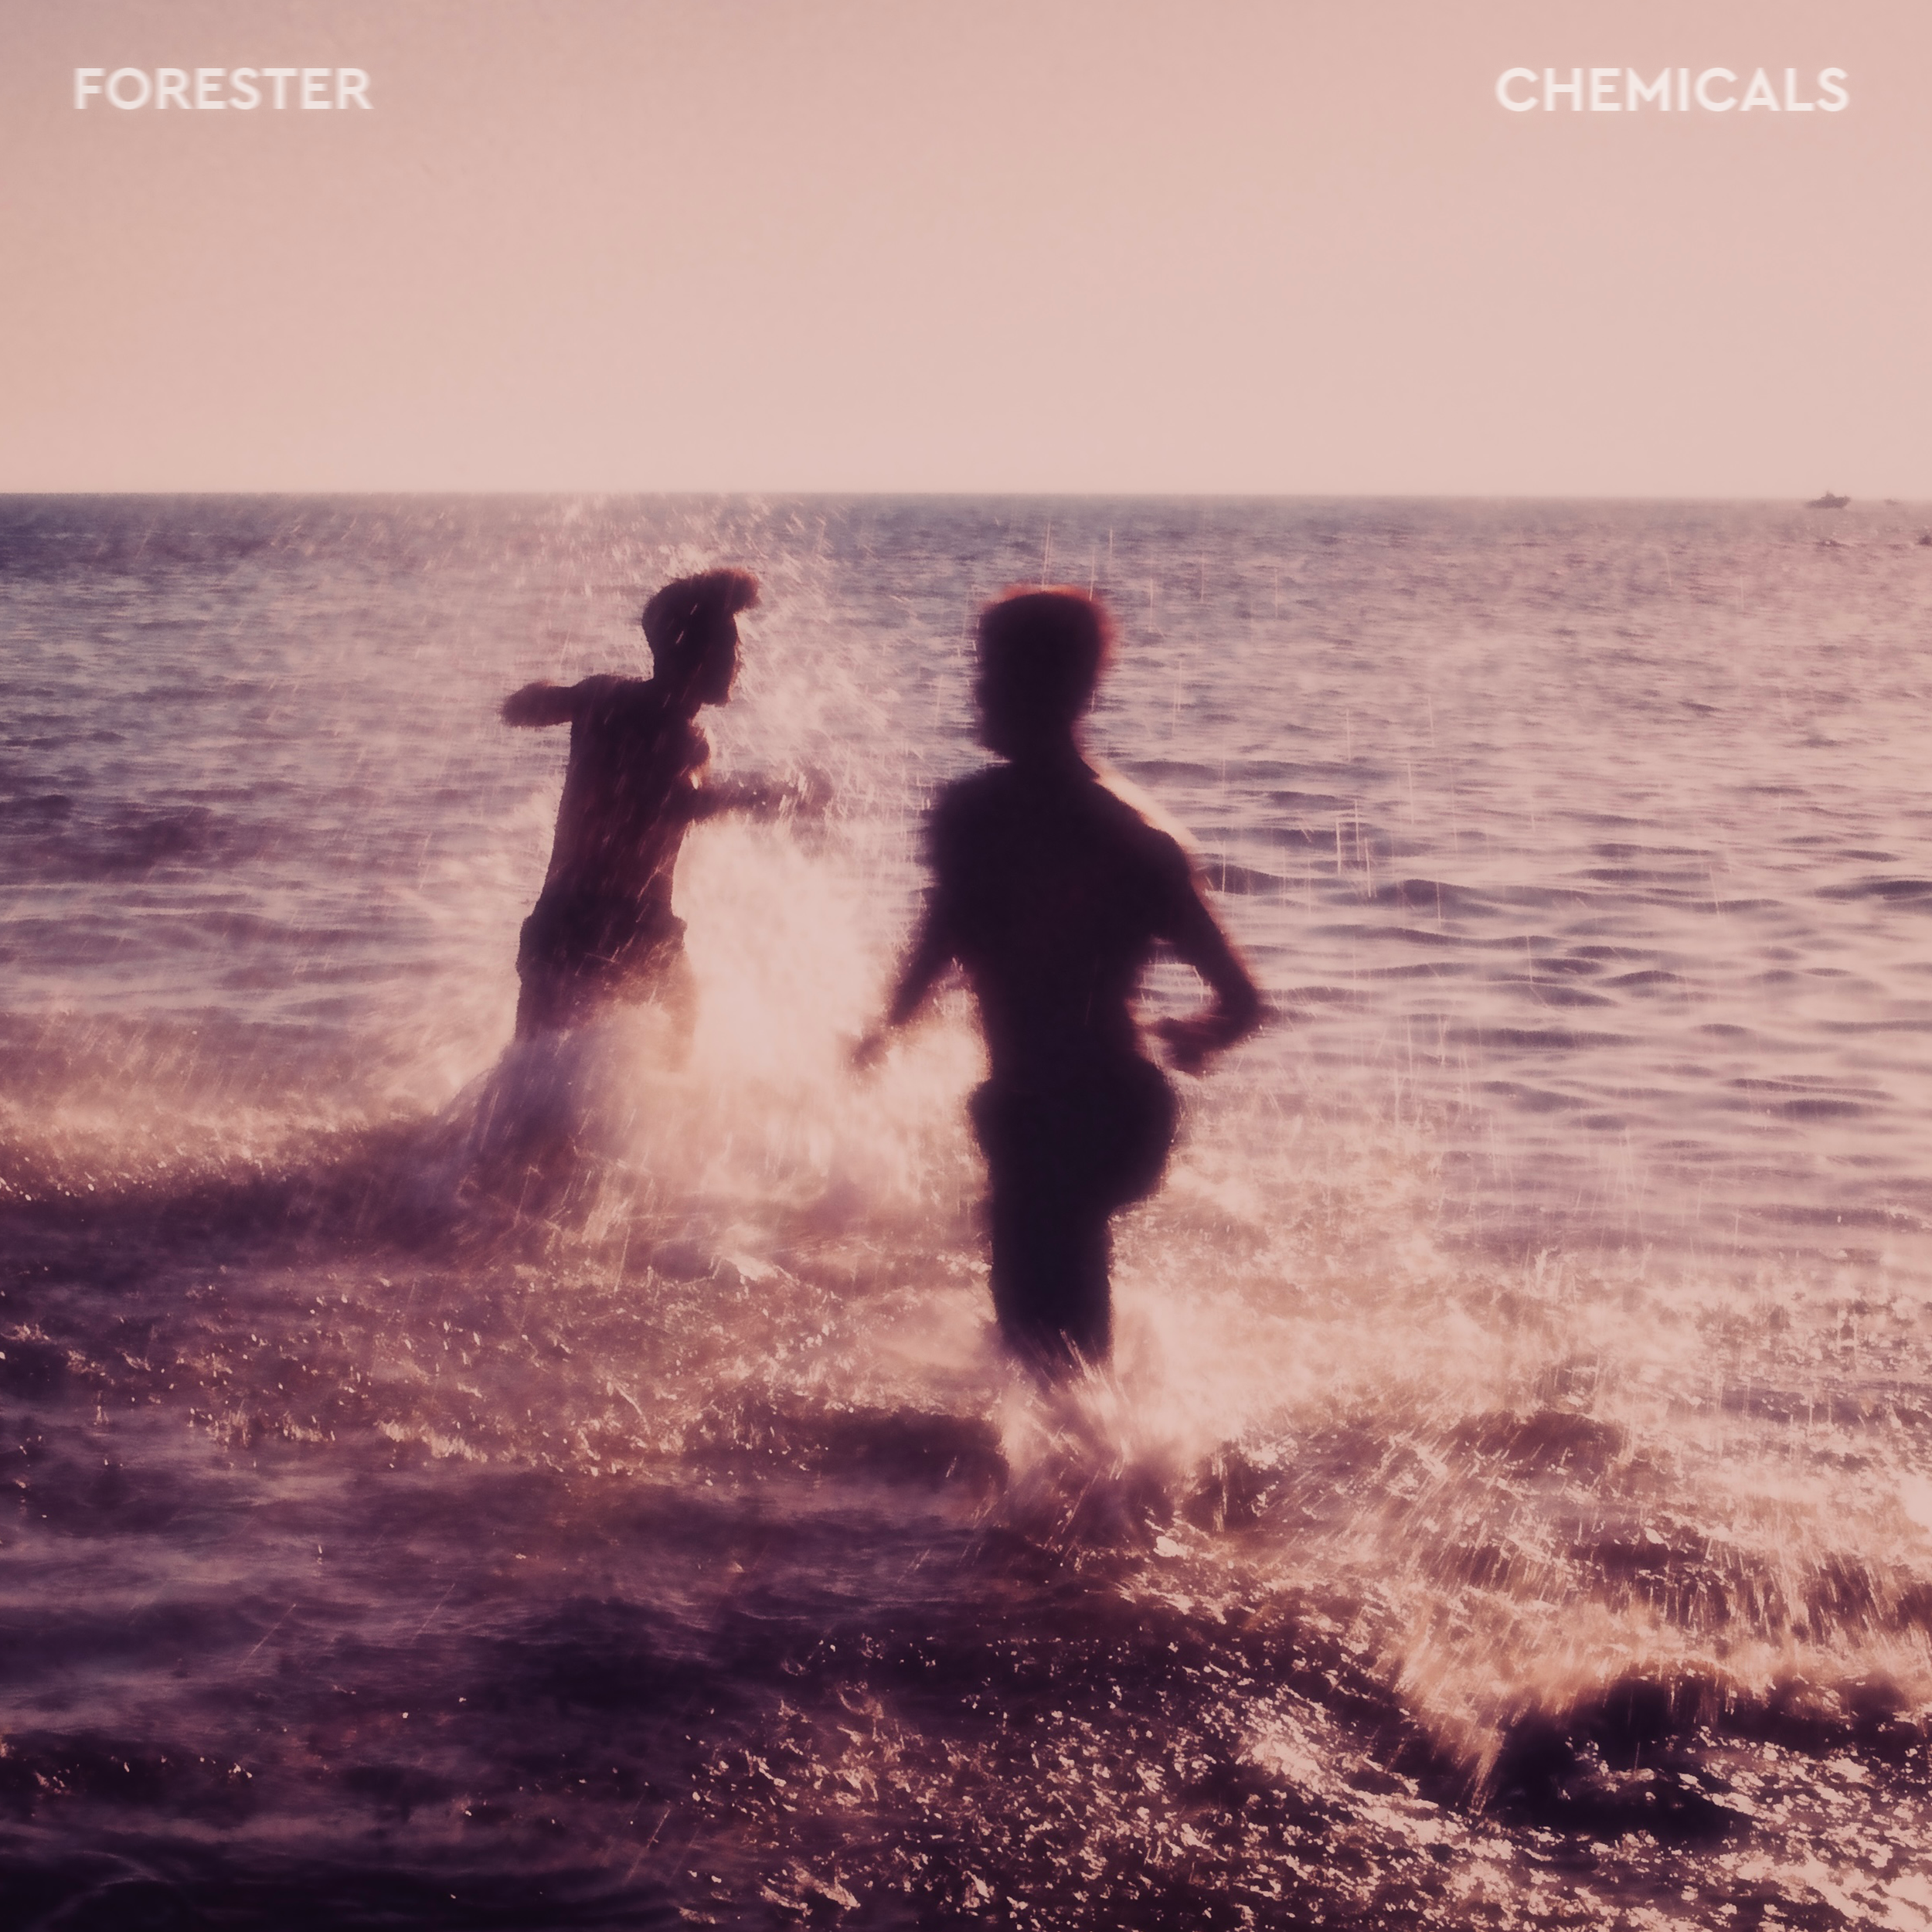 Chemicals single art.png